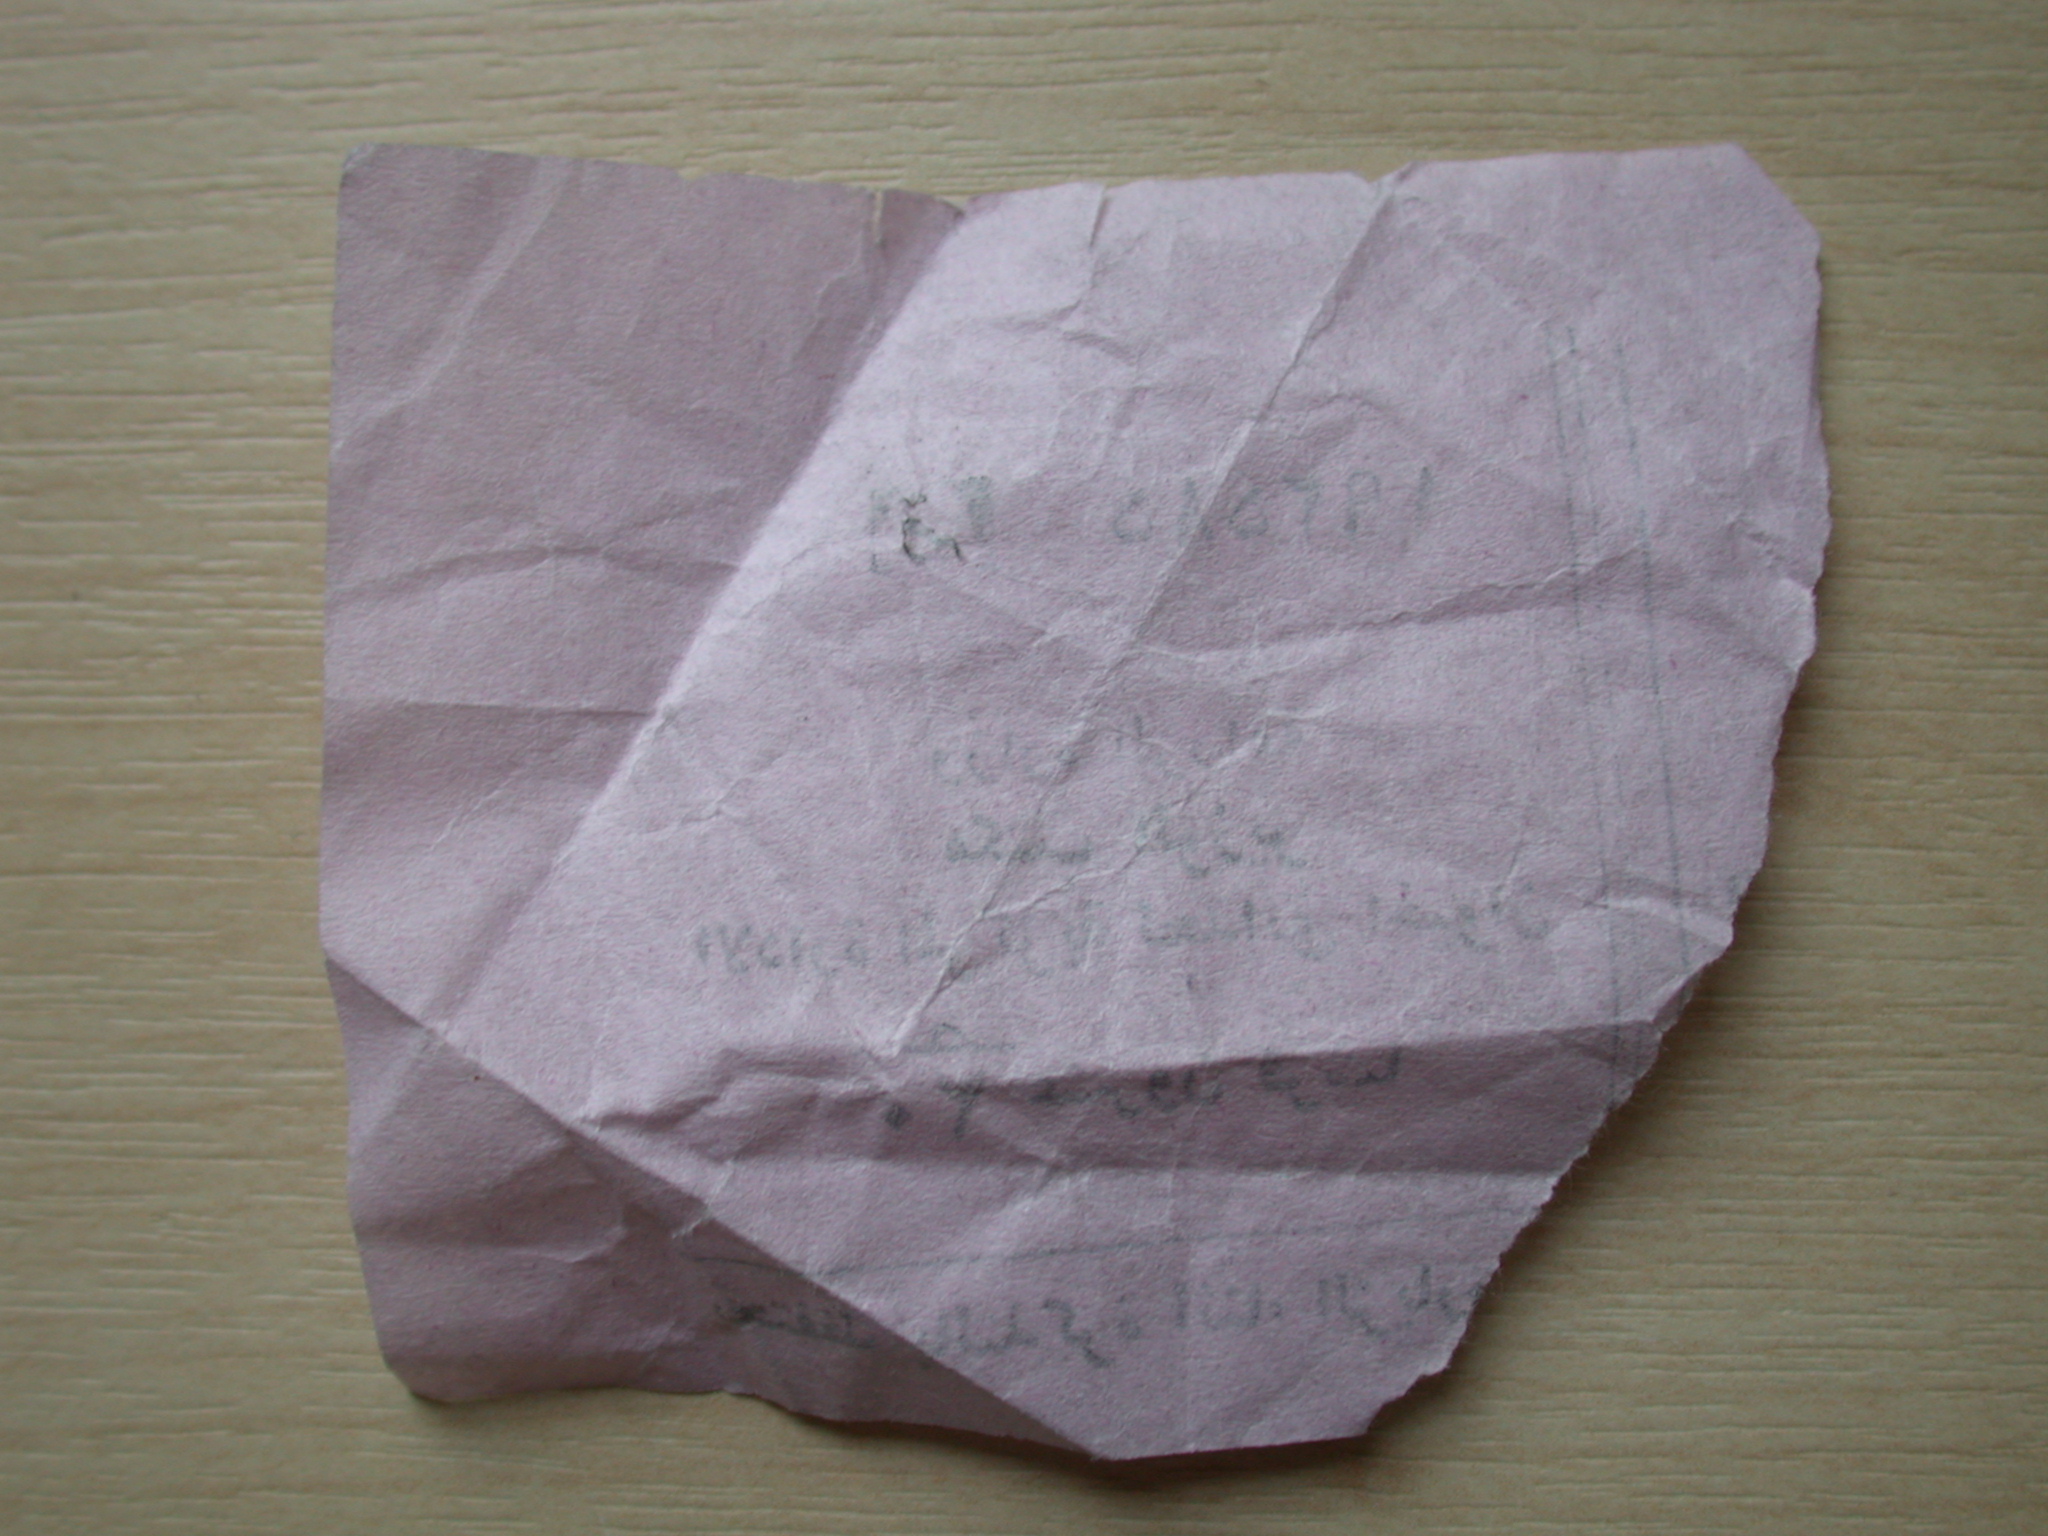 piece of paper note torn